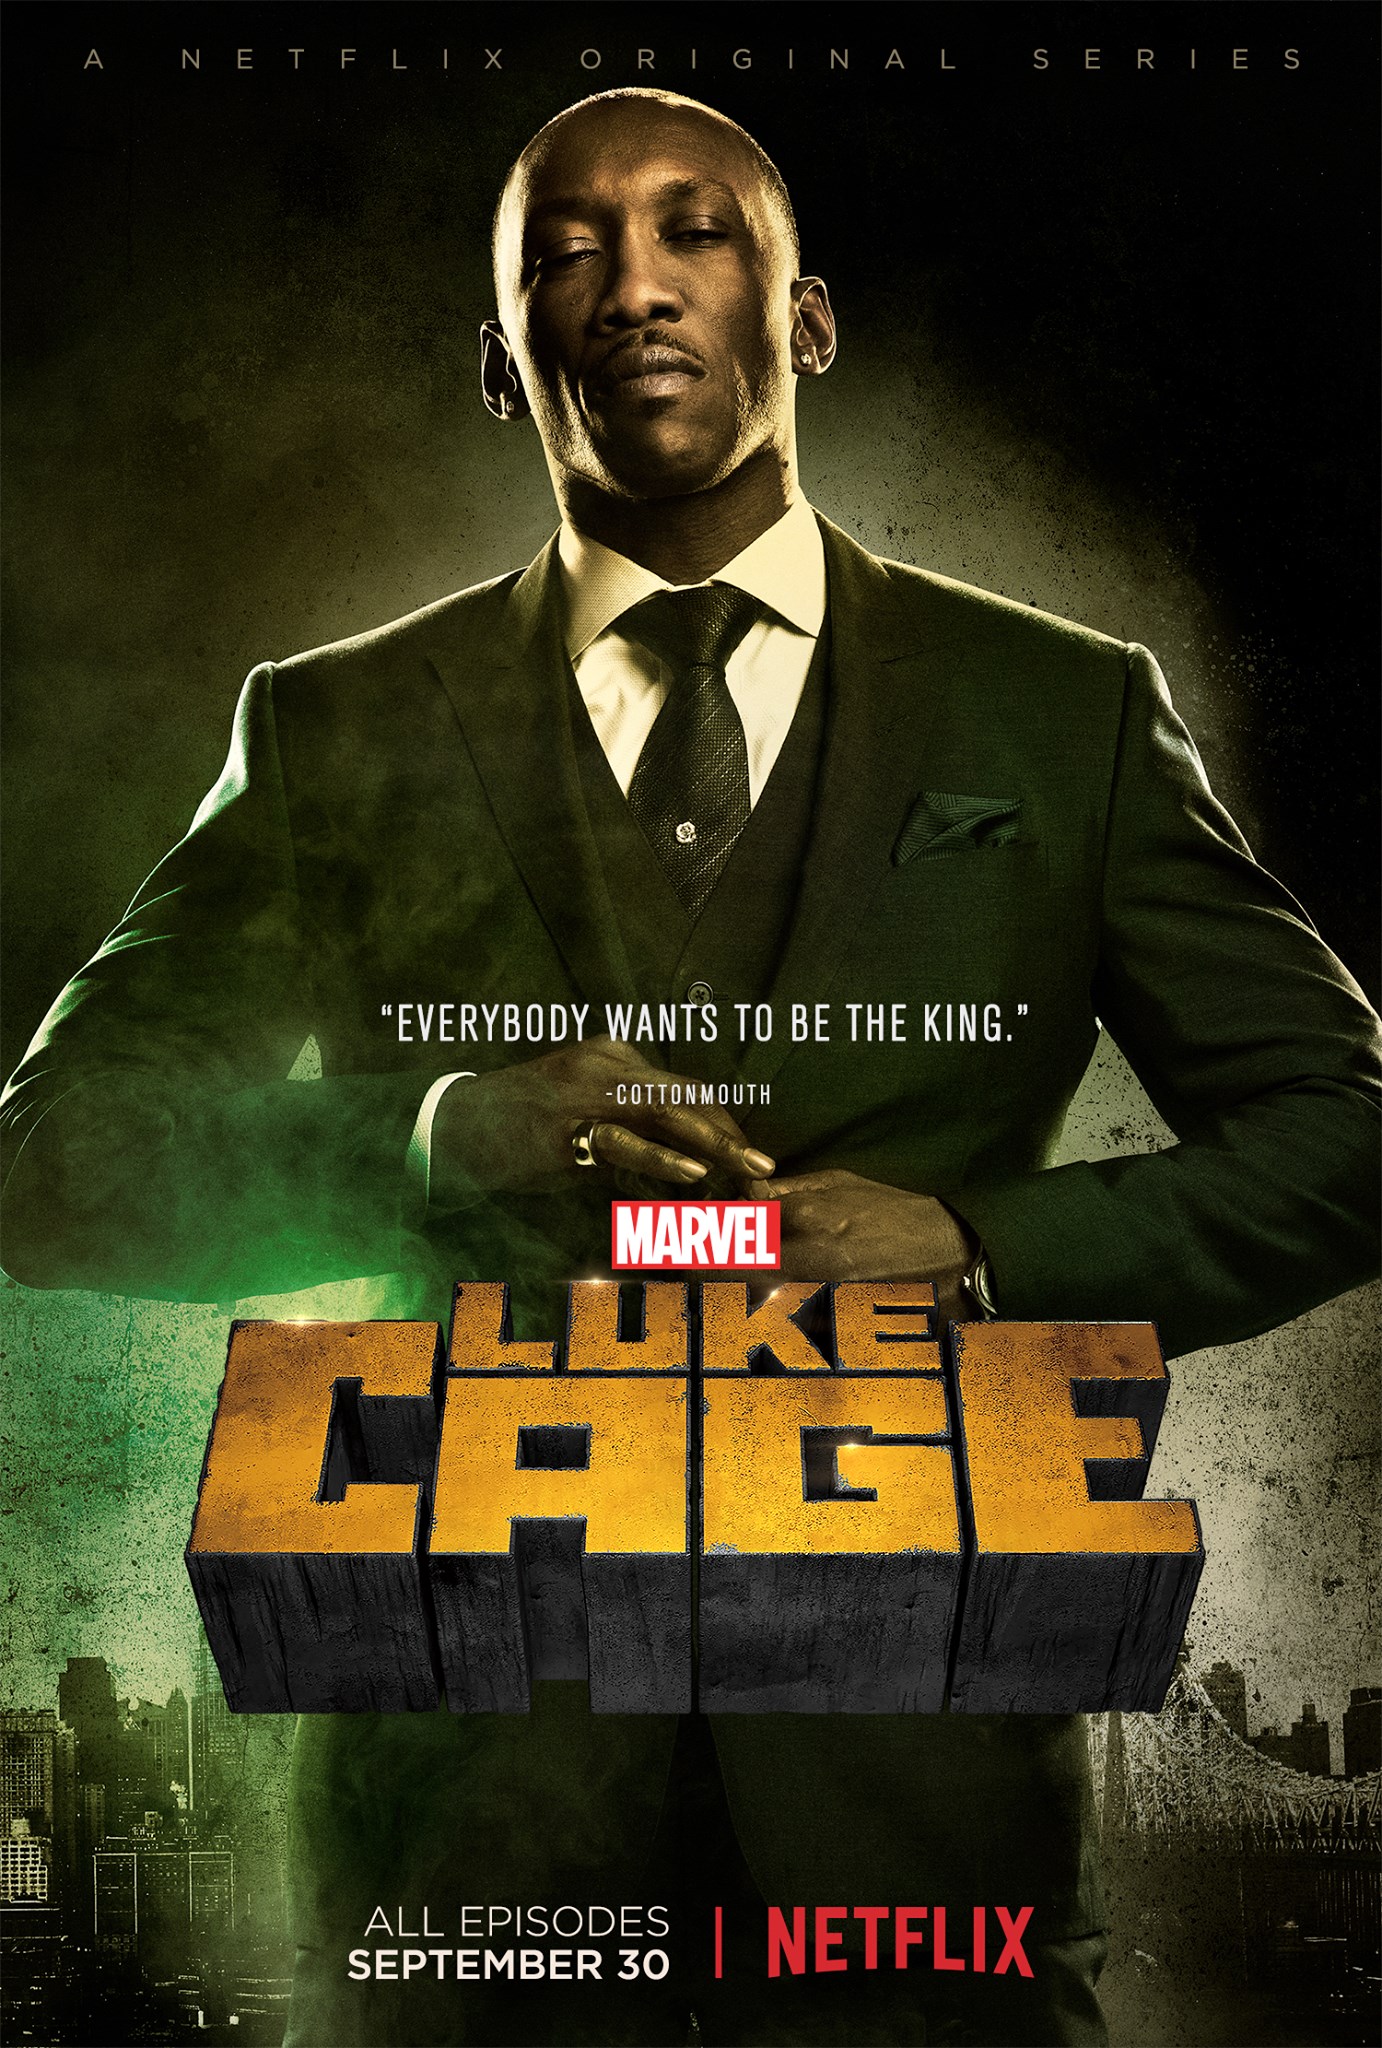 Luke Cage Backgrounds, Compatible - PC, Mobile, Gadgets| 1382x2048 px